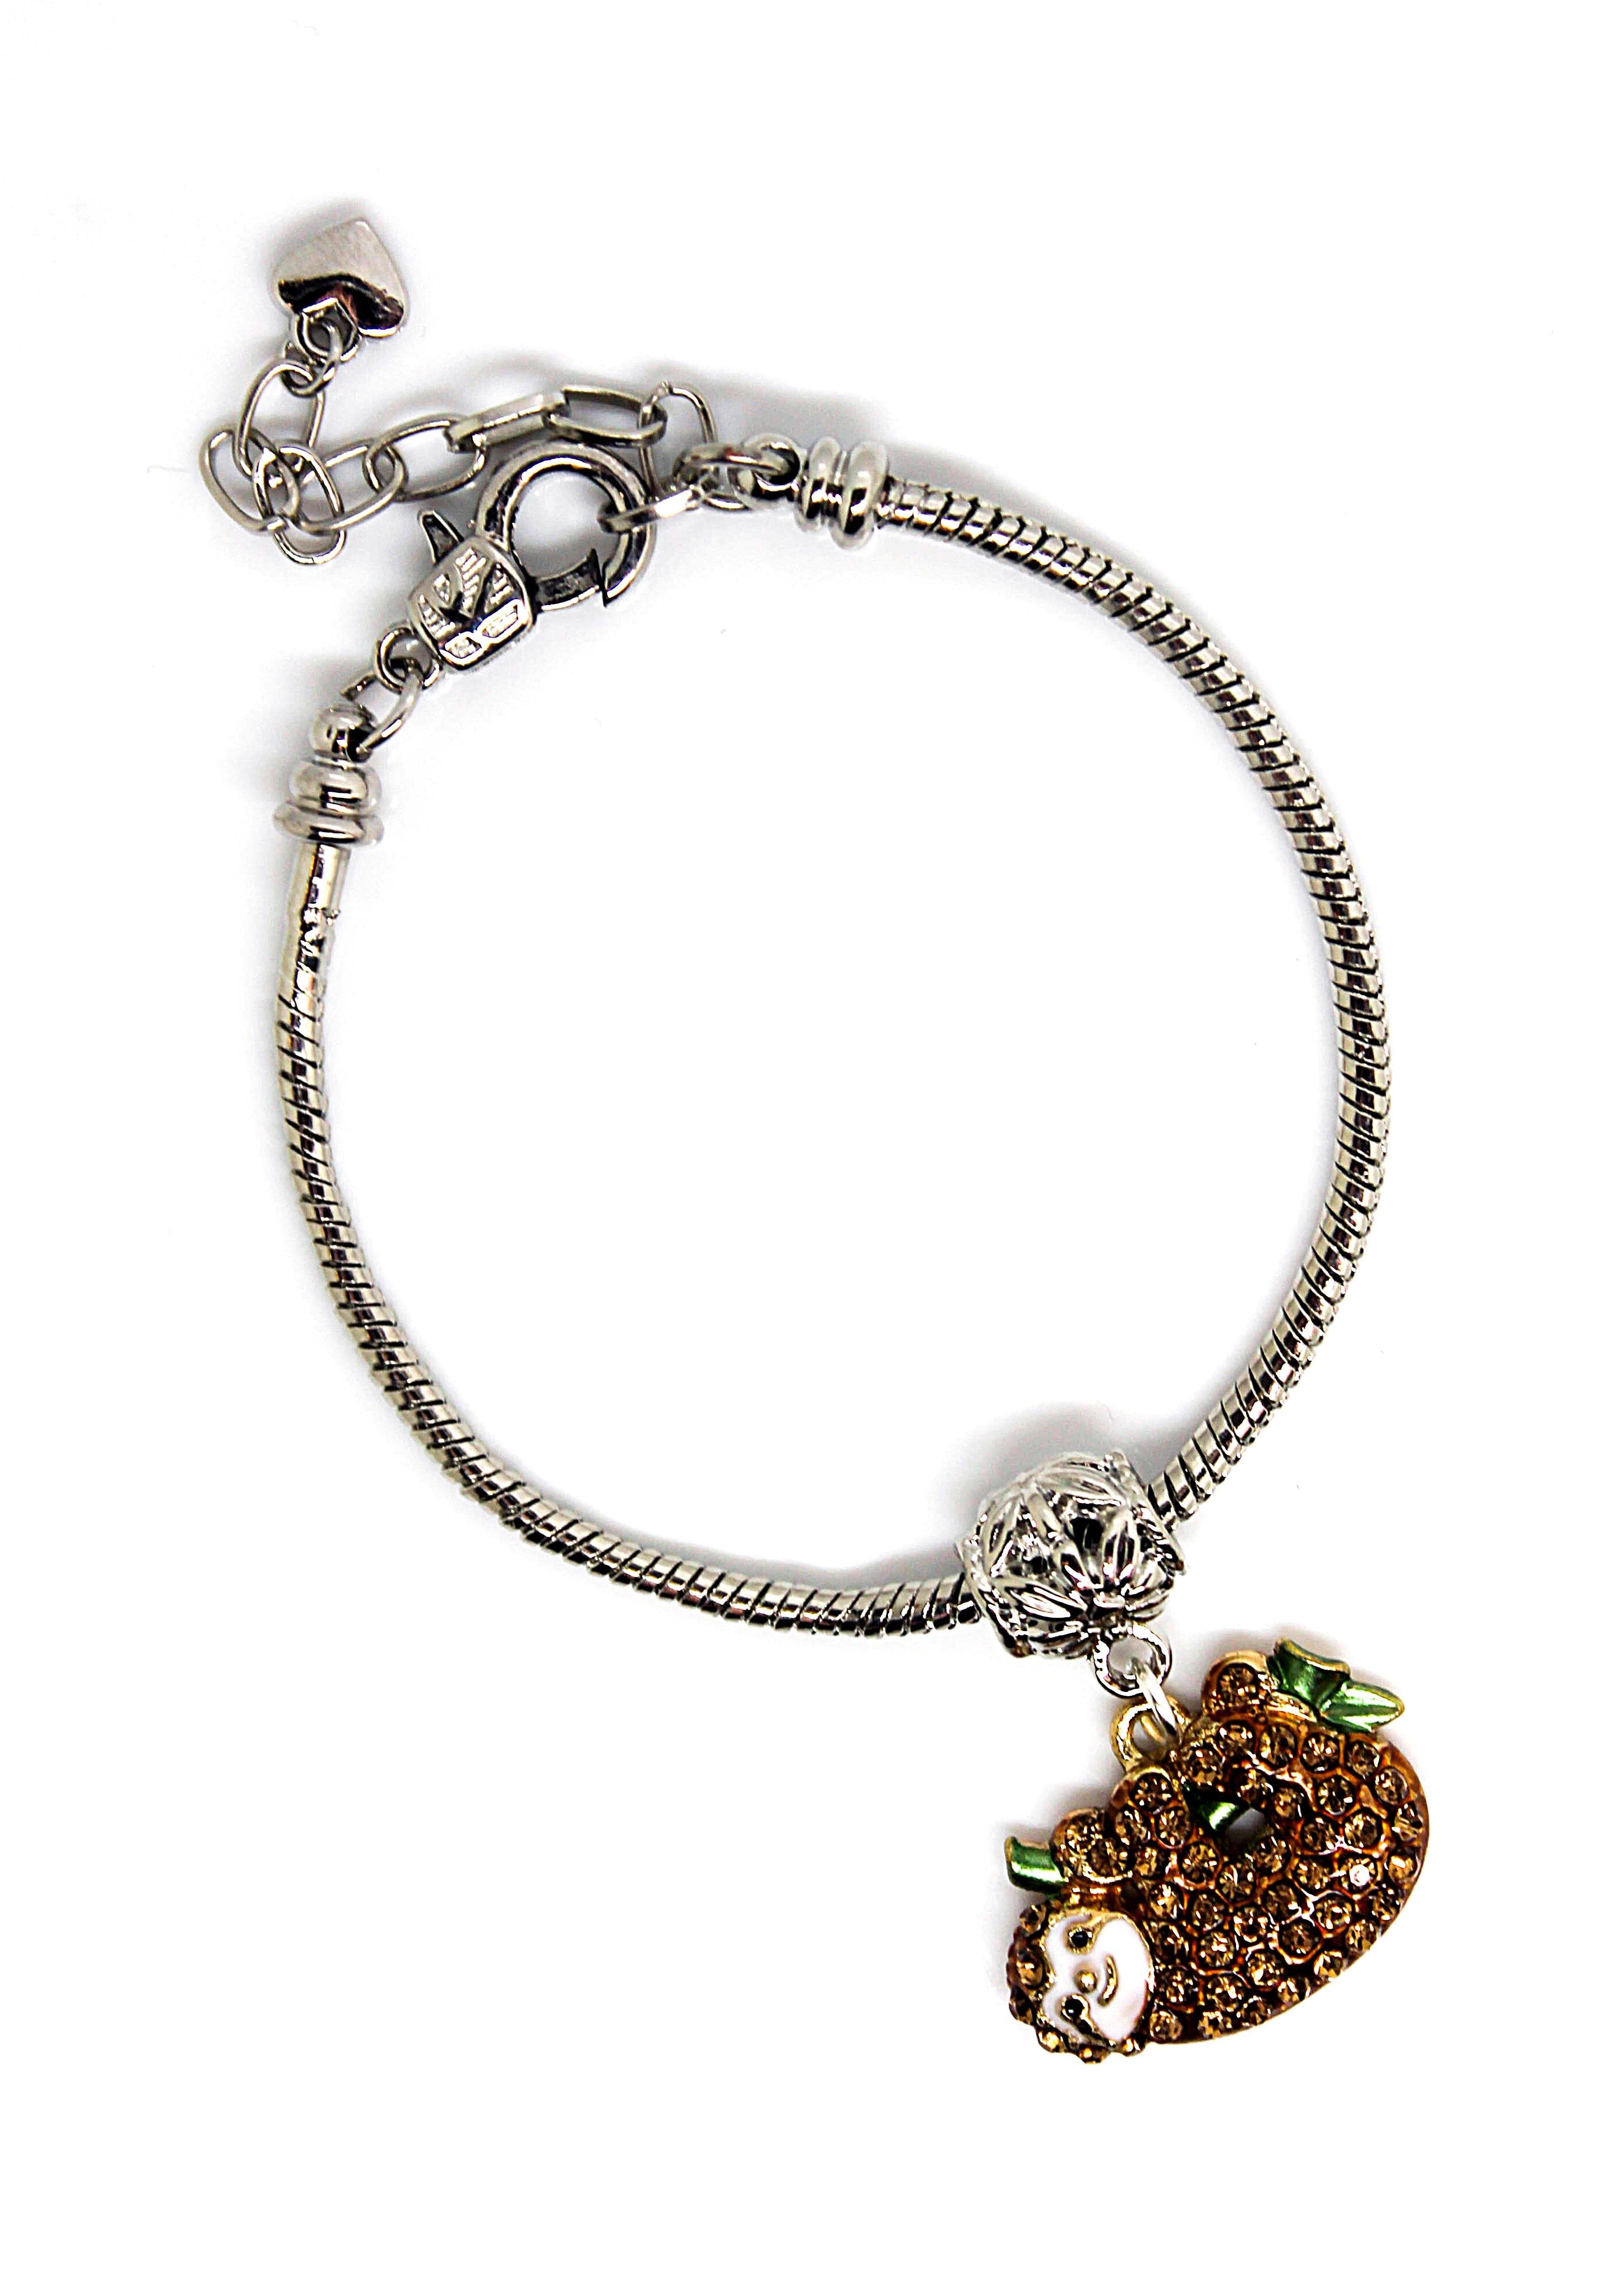 Sloth Charm Bracelet - Wildtouch - Wildtouch